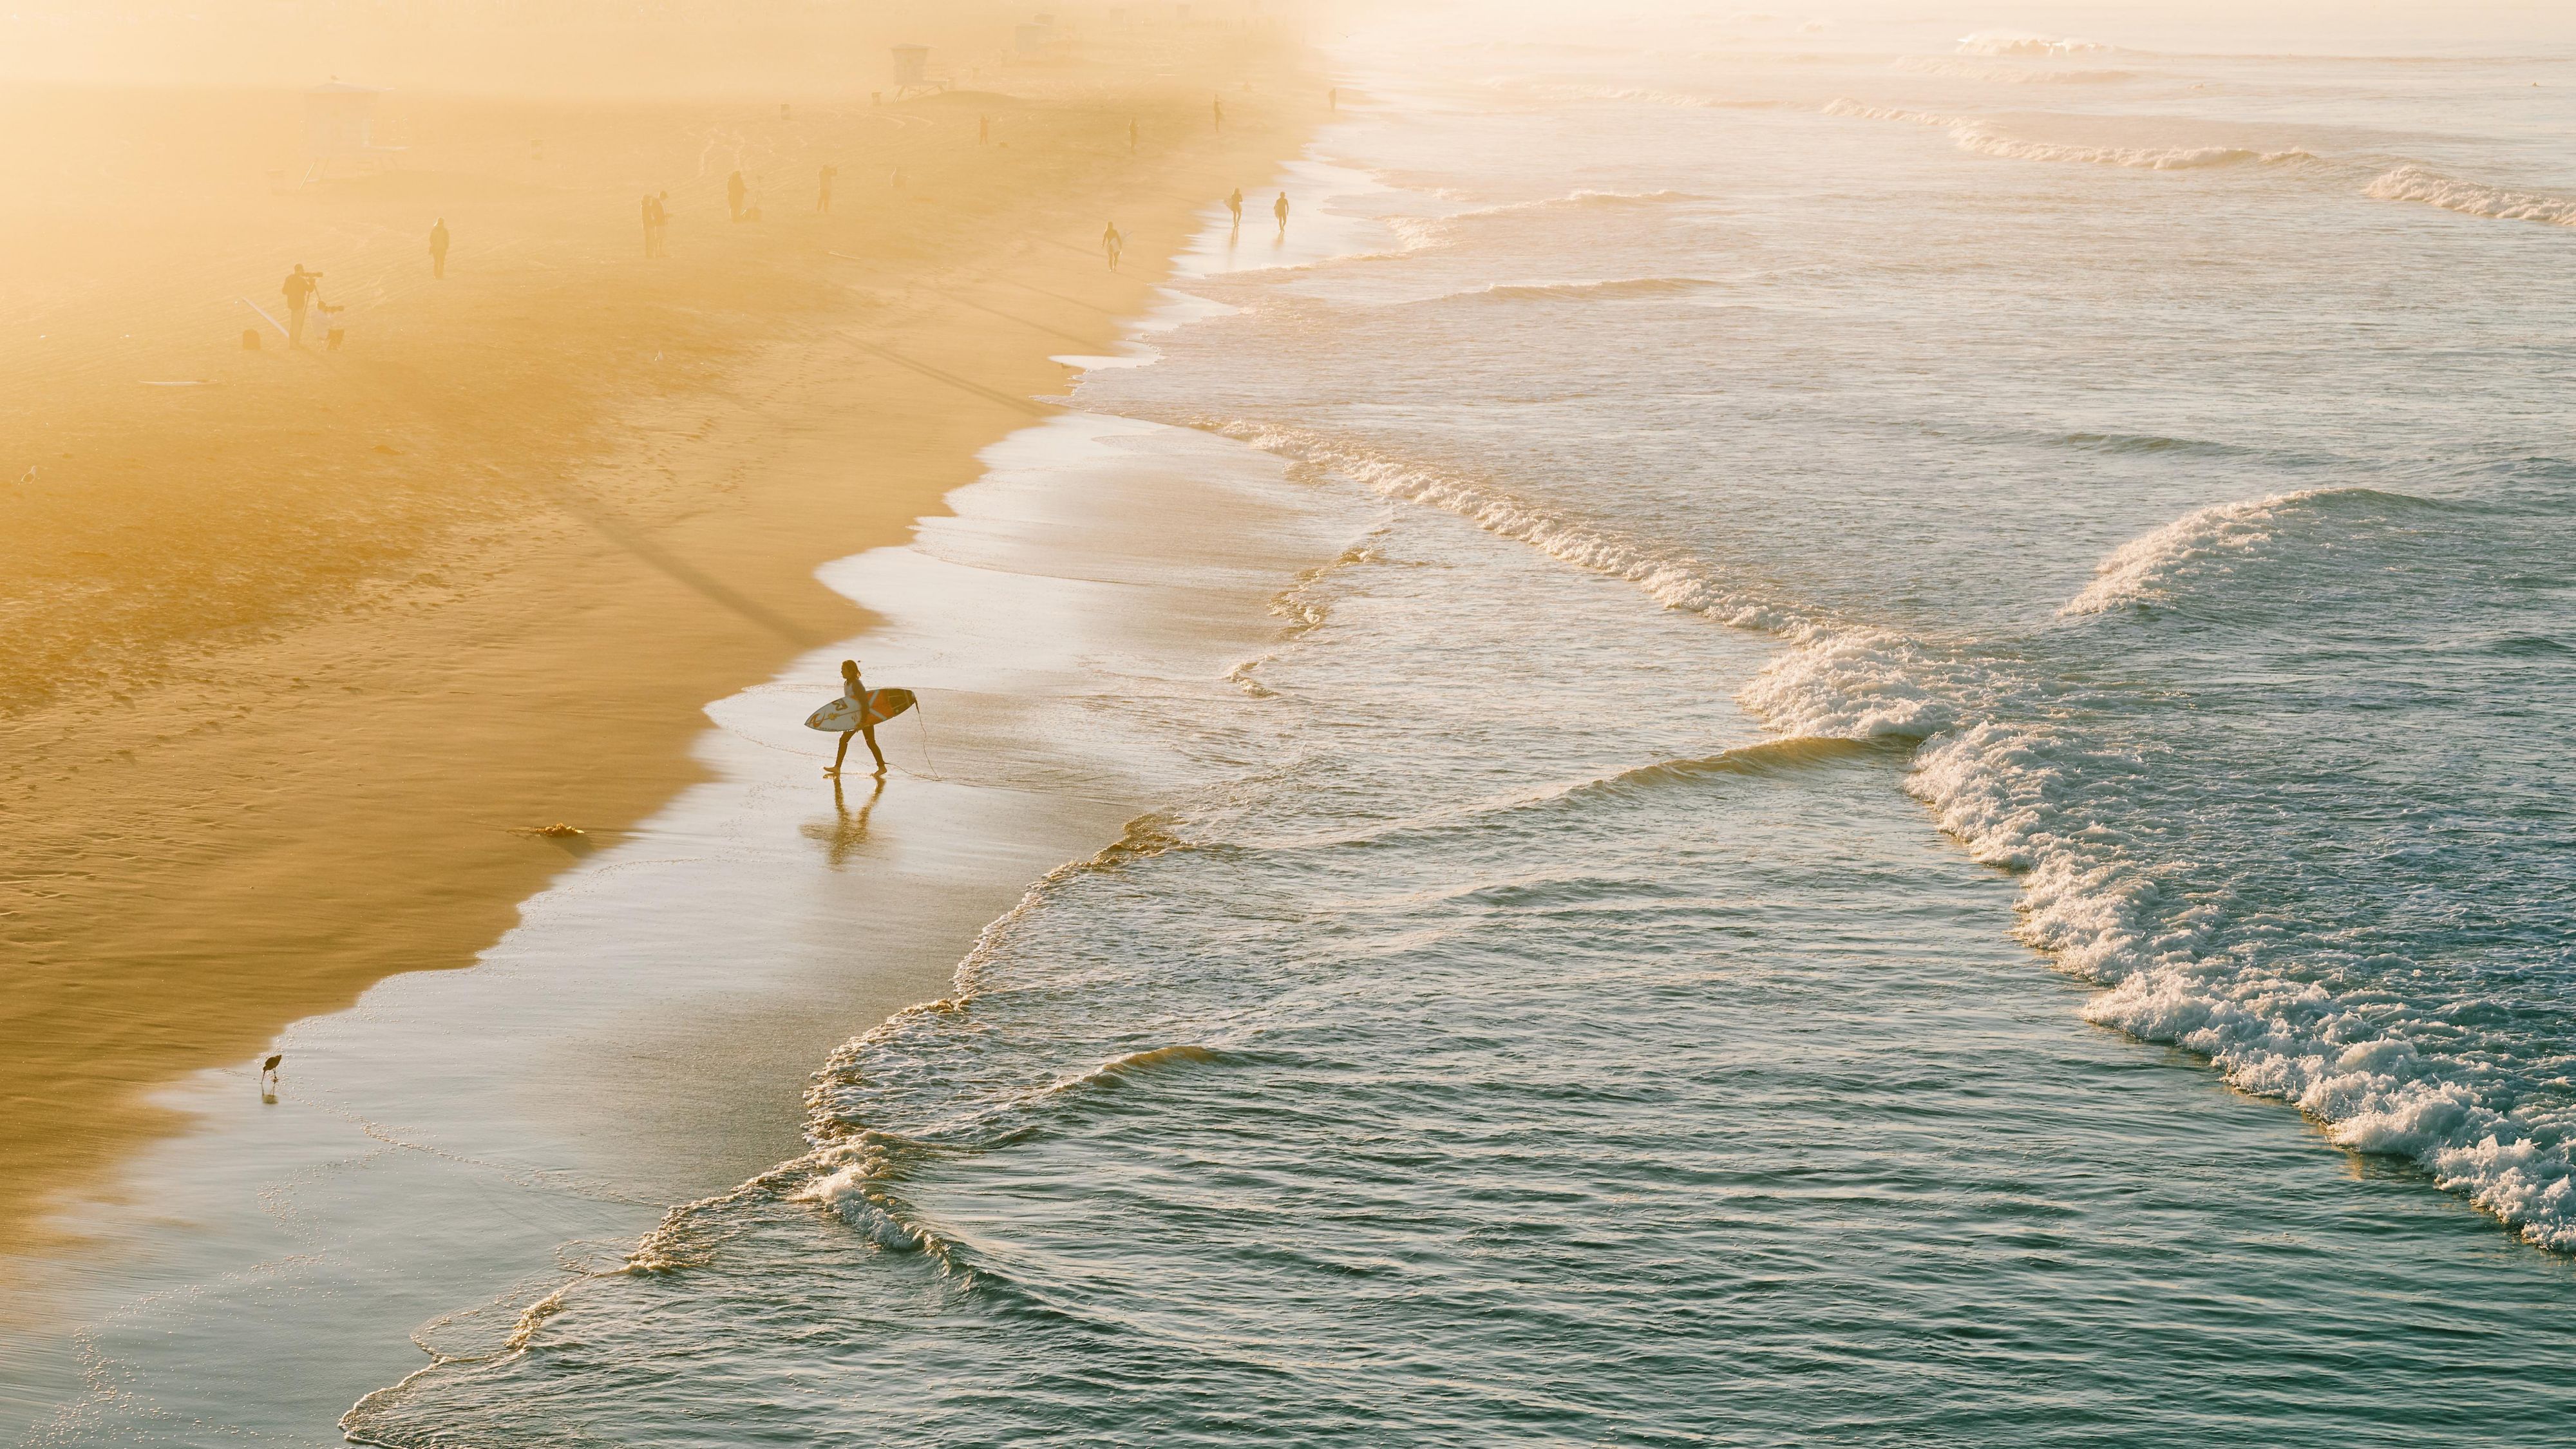 Surfer with surf board on the beach at dusk